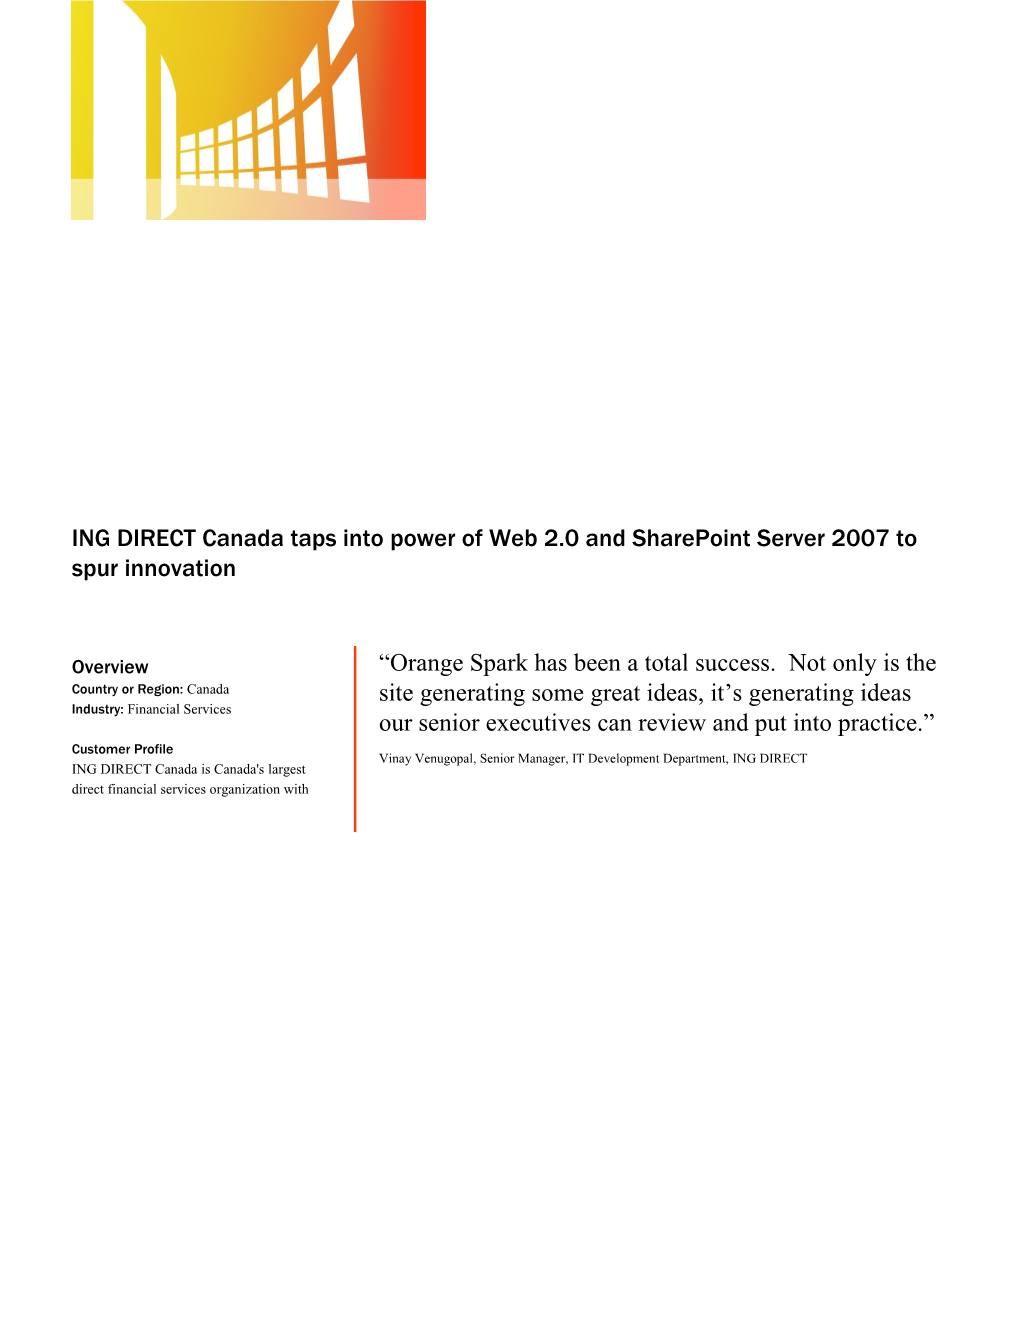 Writeimage CEP ING DIRECT Canada Taps Into Power of Web 2.0 and Sharepoint Server 2007